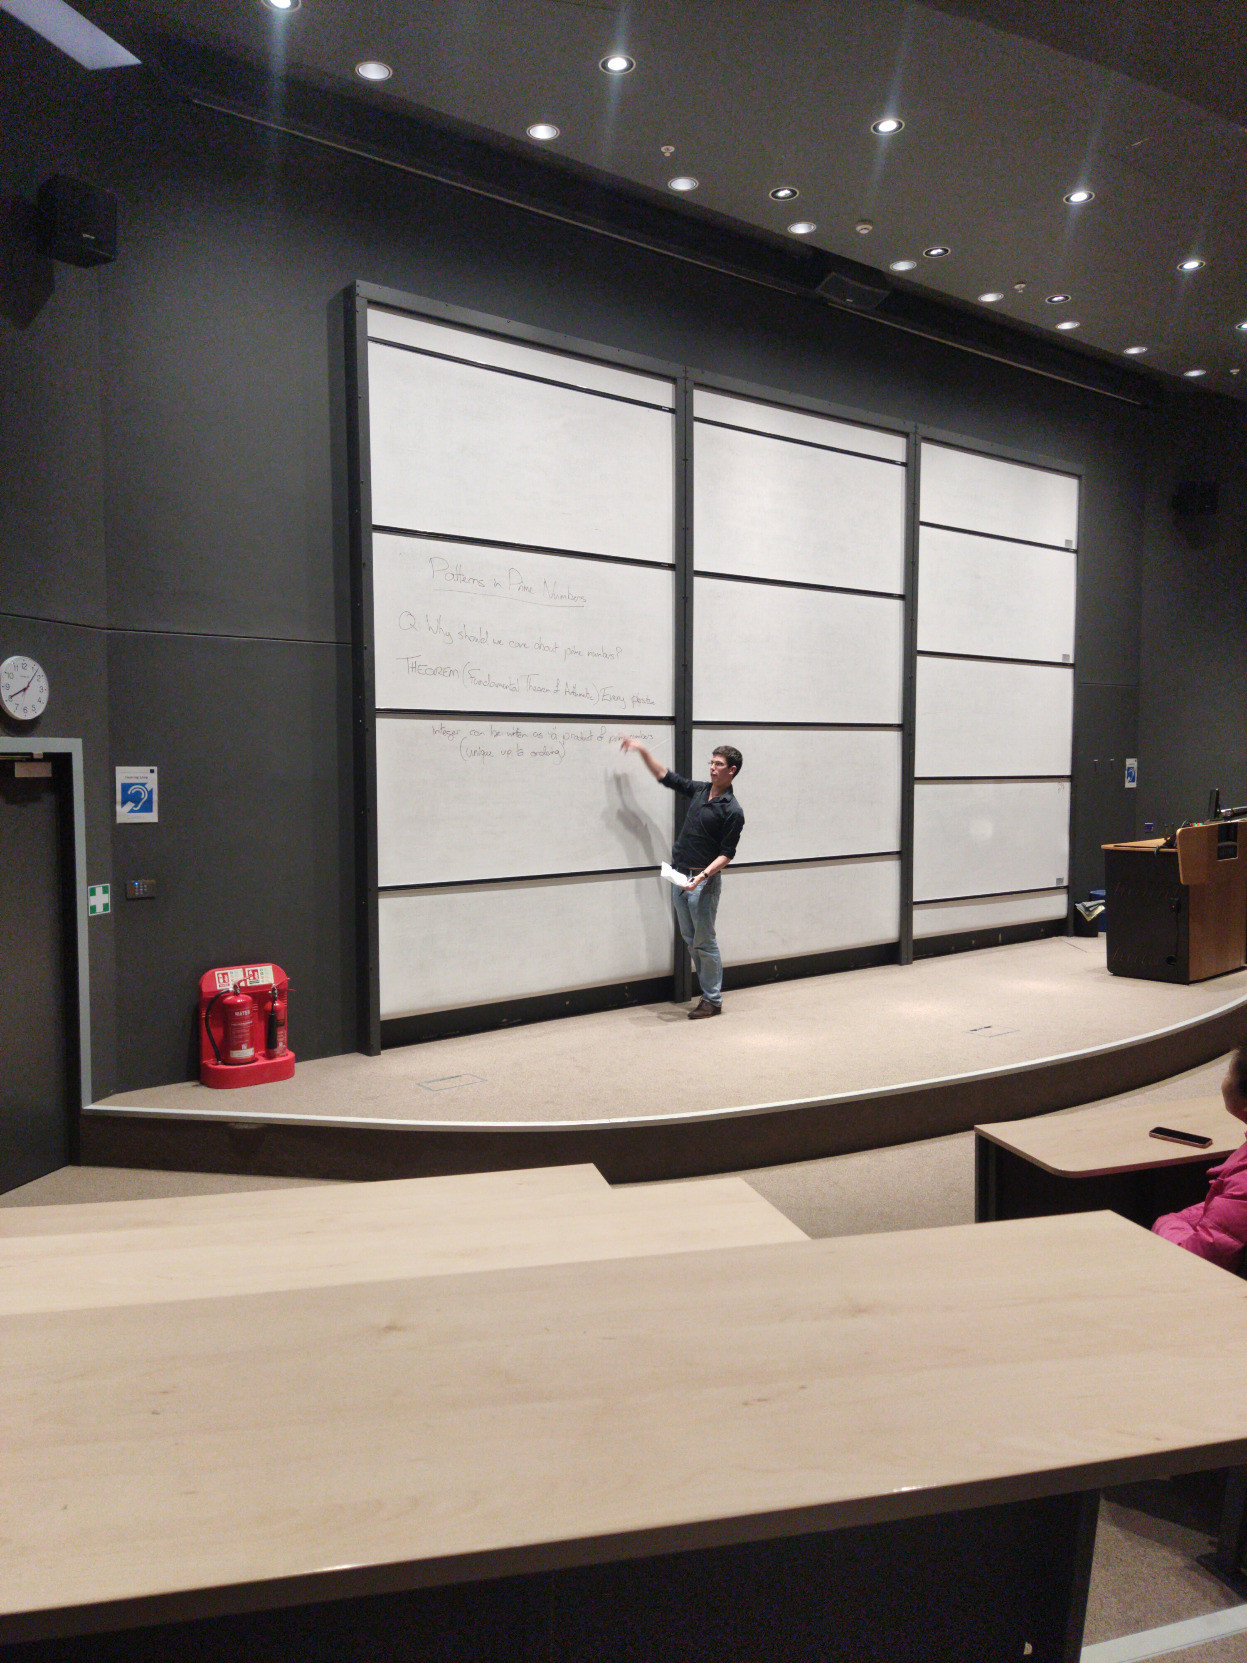 James Maynard in front of the Maths Institute Whiteboards at Oxford University